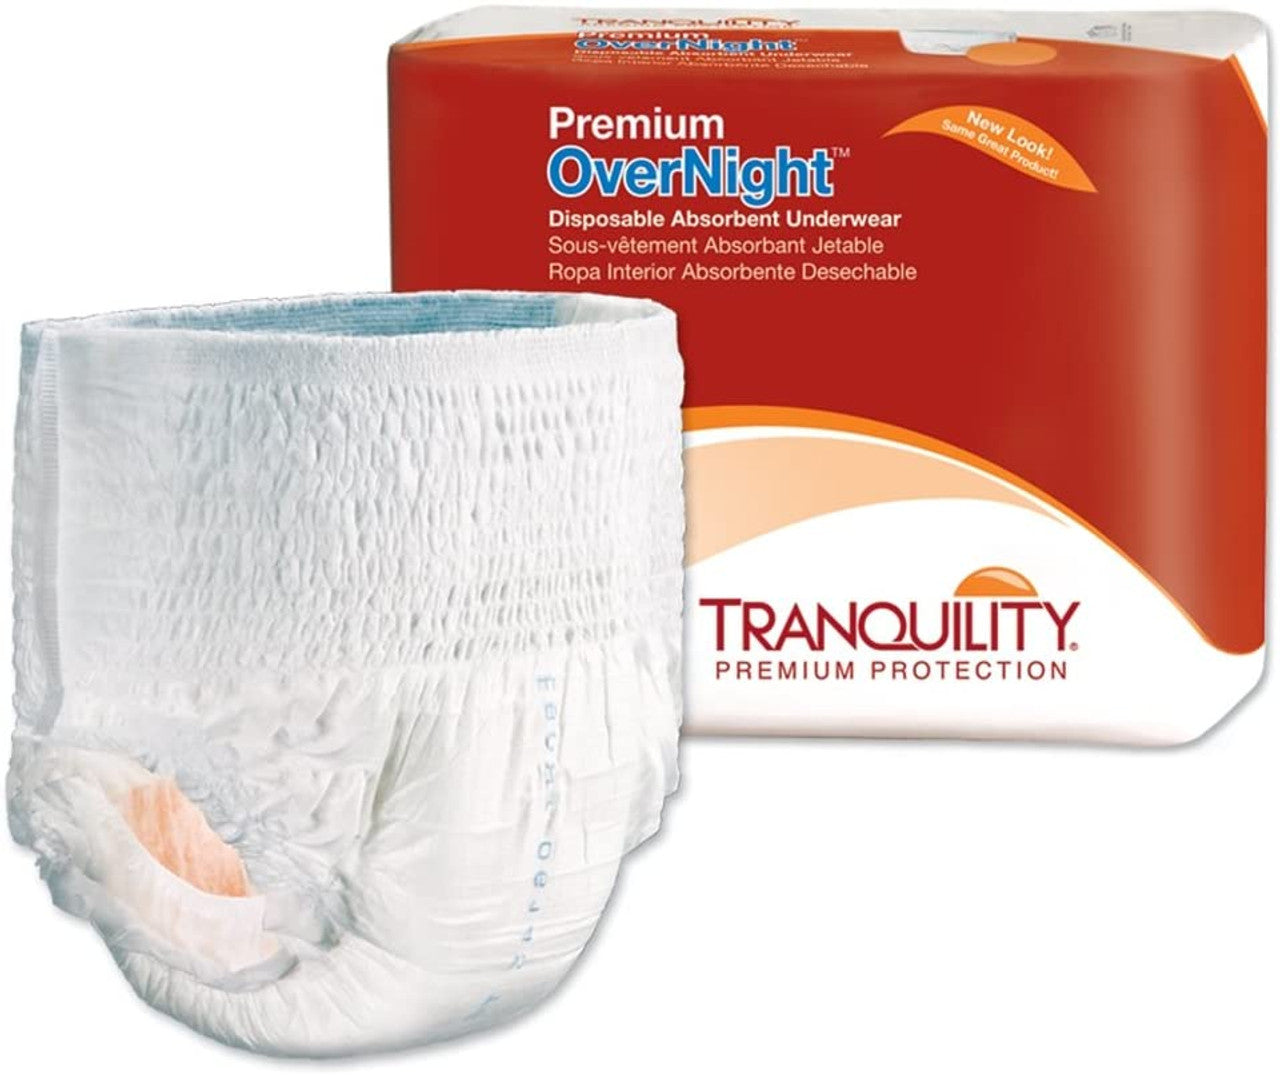 Tranquility Premium Overnight Disposable Pull-Up Adult Underwear Medium -  health and beauty - by owner - household